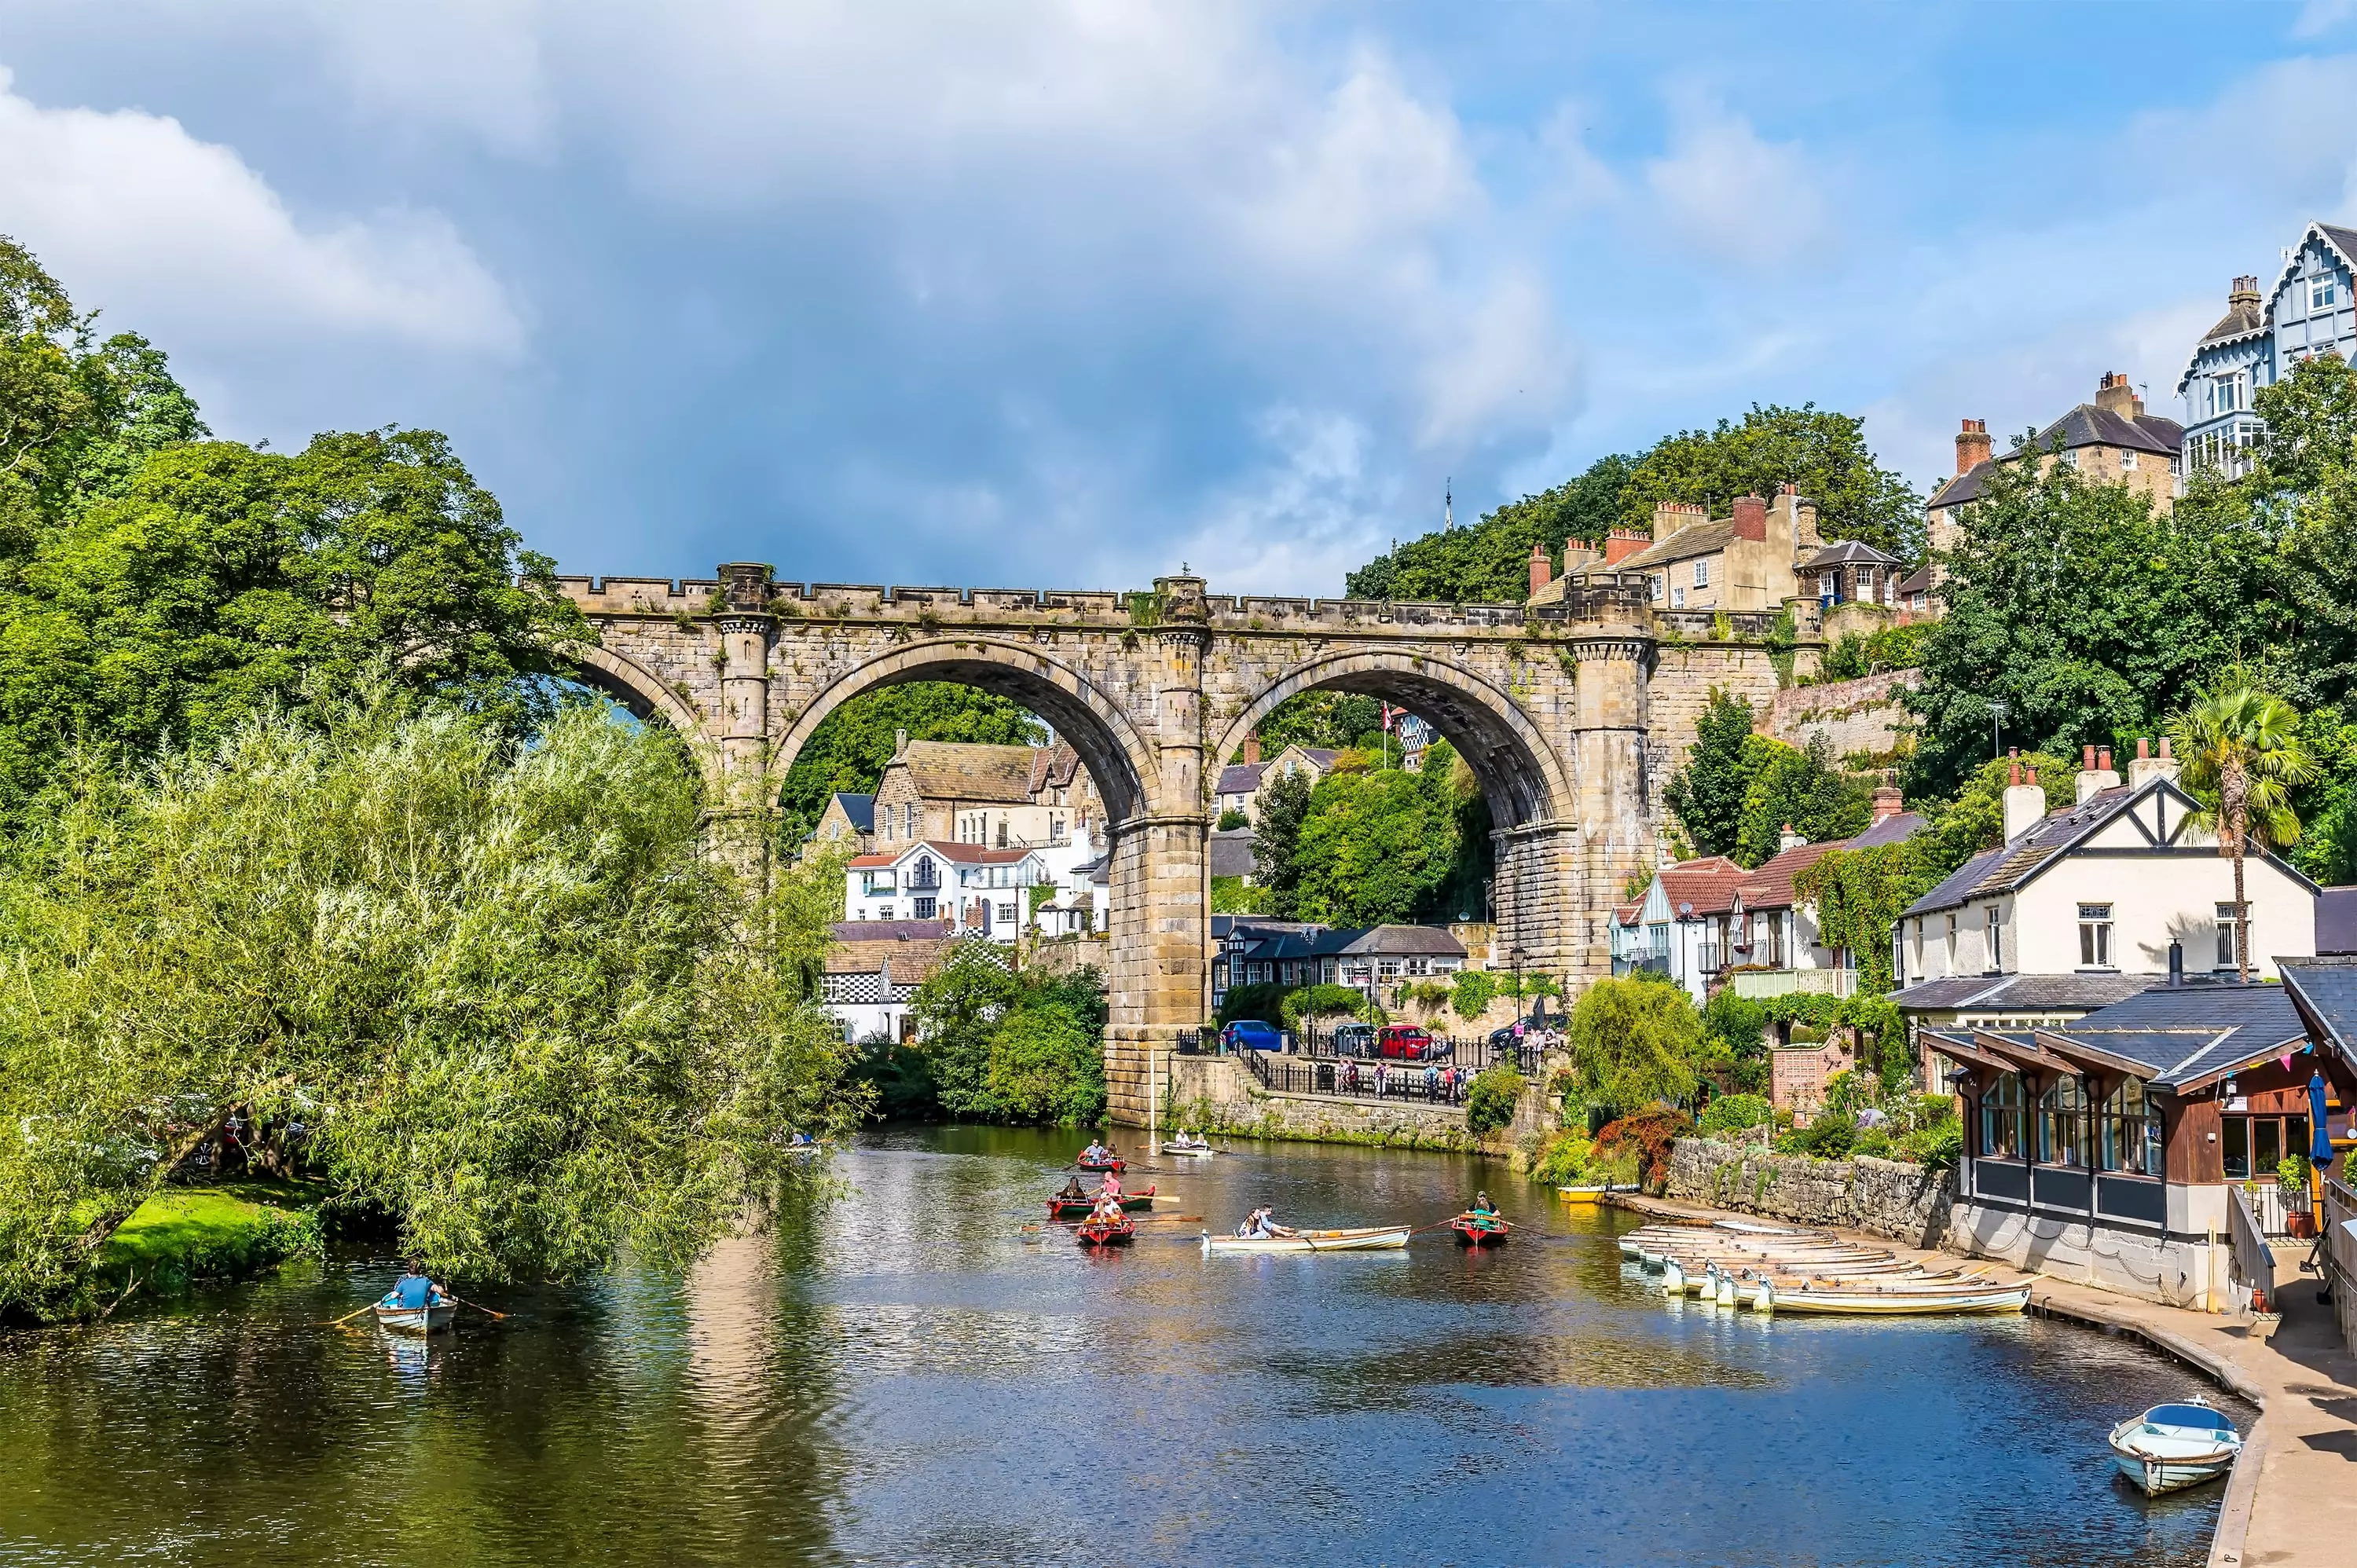 A view along the River Nidd towards the viaduct in the town of Knaresborough in Yorkshire.